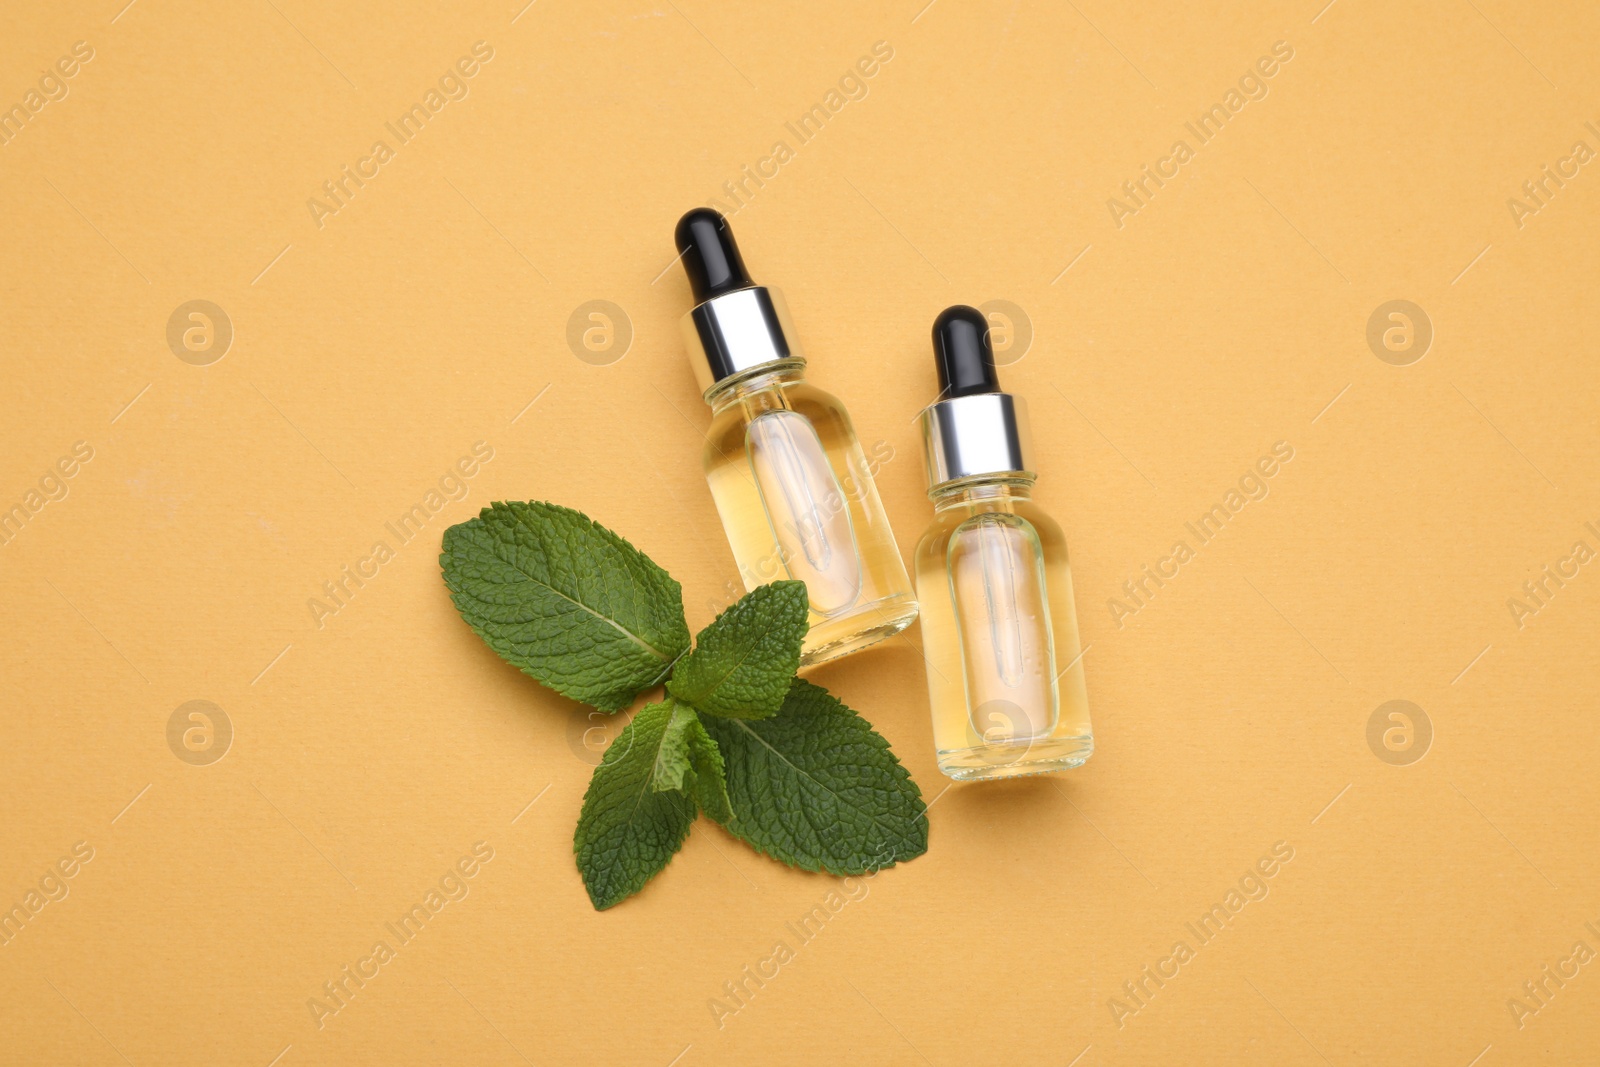 Photo of Bottles of essential oil and mint on pale orange background, flat lay